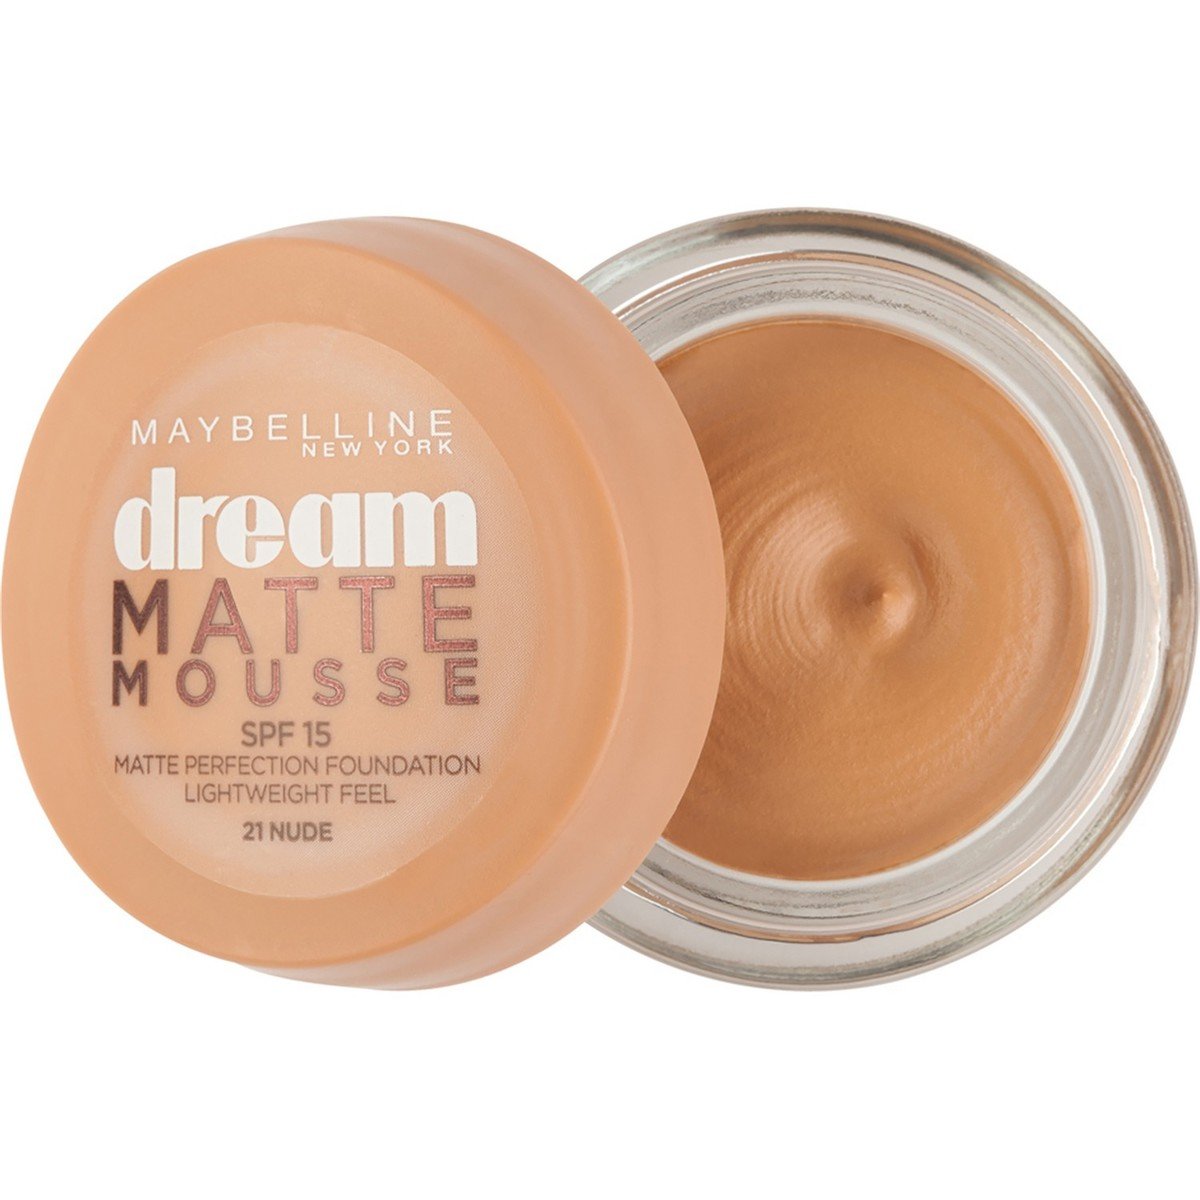 Maybelline Dream Matte Mousse Foundation Nude 21 1pc